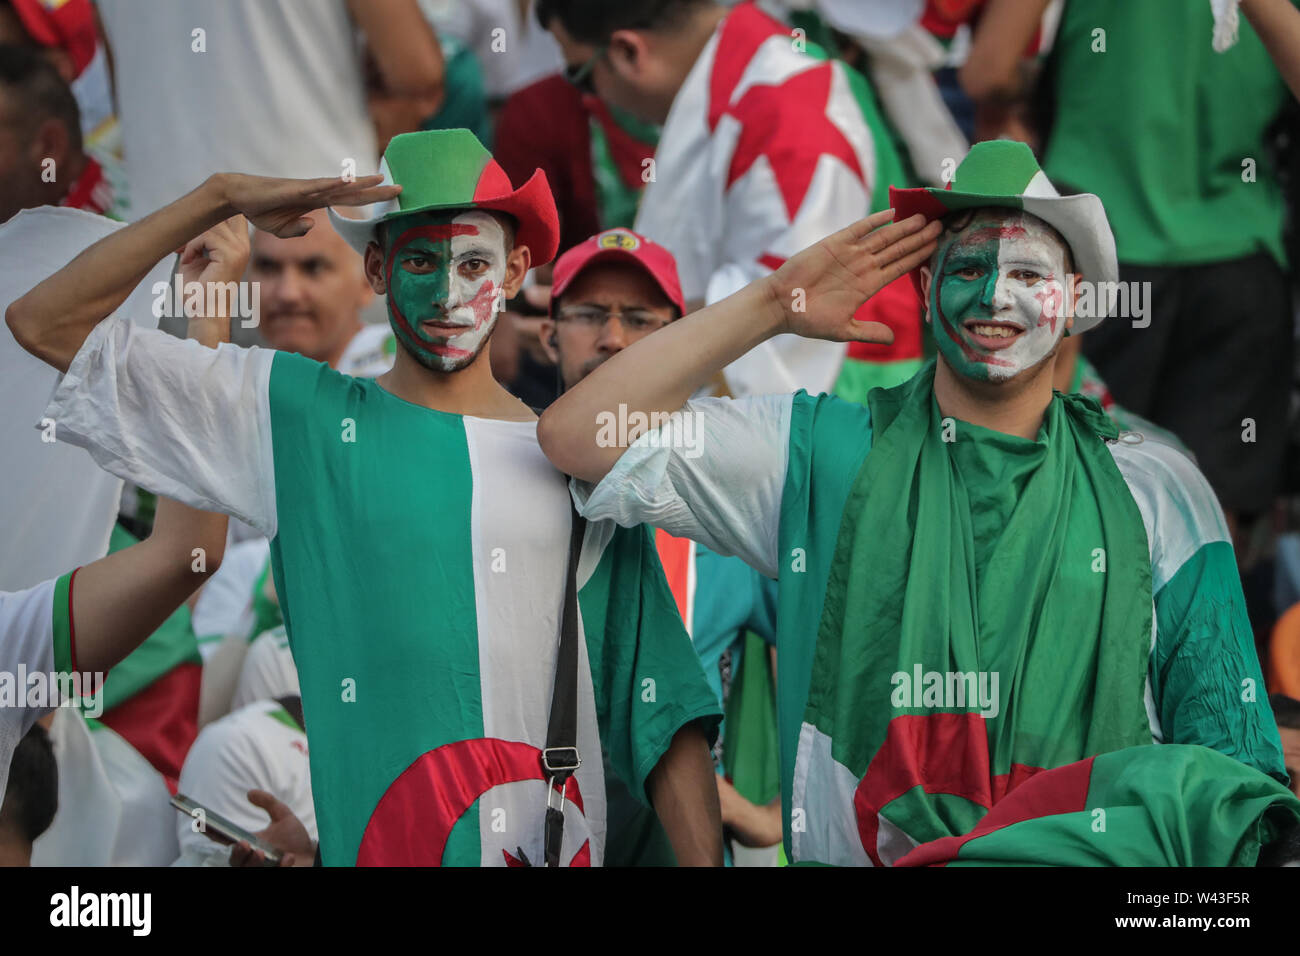 Cairo, Egypt. 19th July, 2019. Algerian fans cheer in the stands prior to the start of the 2019 Africa Cup of Nations final soccer match between Senegal and Algeria at the Cairo International Stadium. Credit: Oliver Weiken/dpa/Alamy Live News Stock Photo